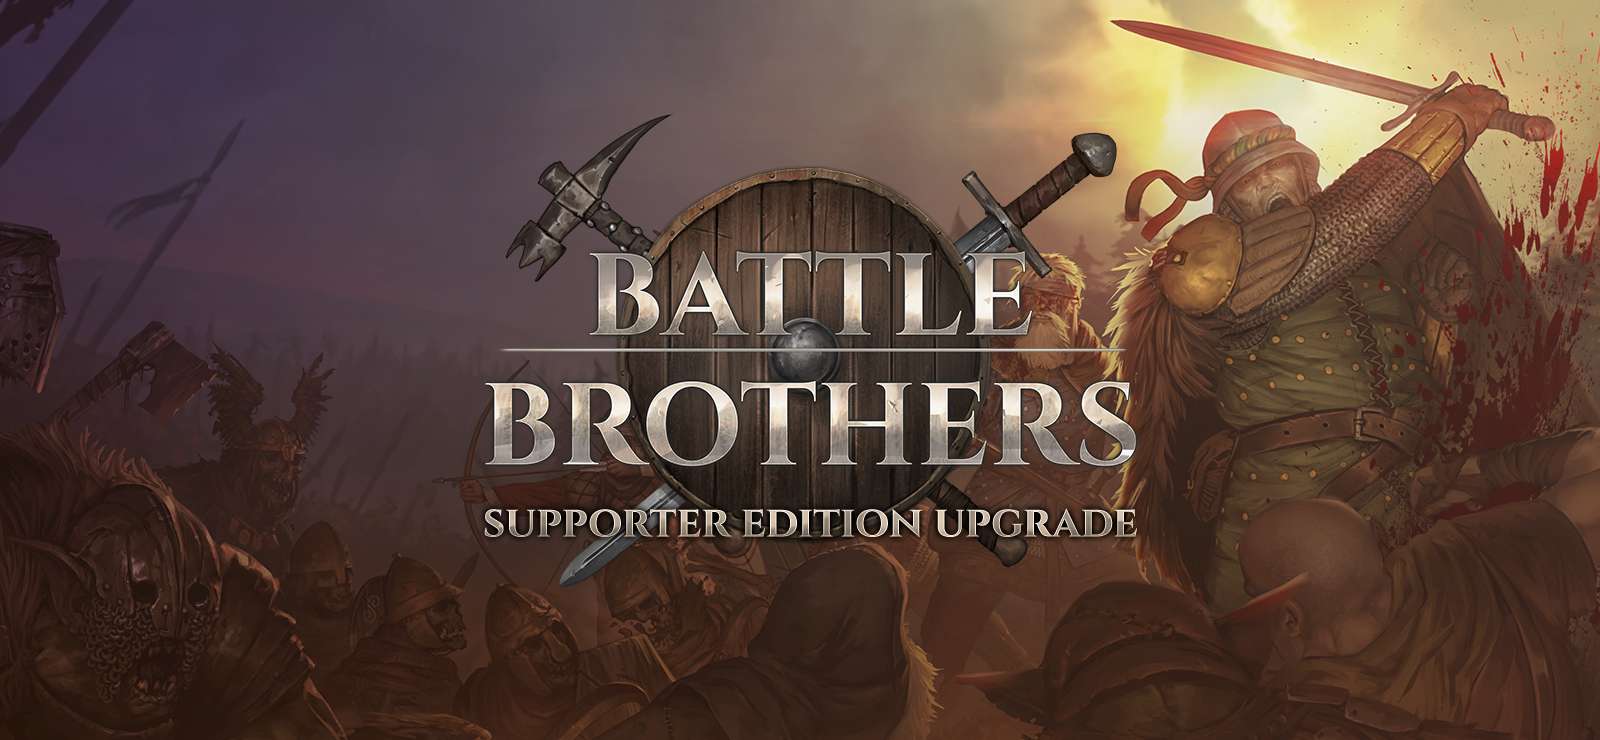 Battle Brothers - Supporter Edition Upgrade